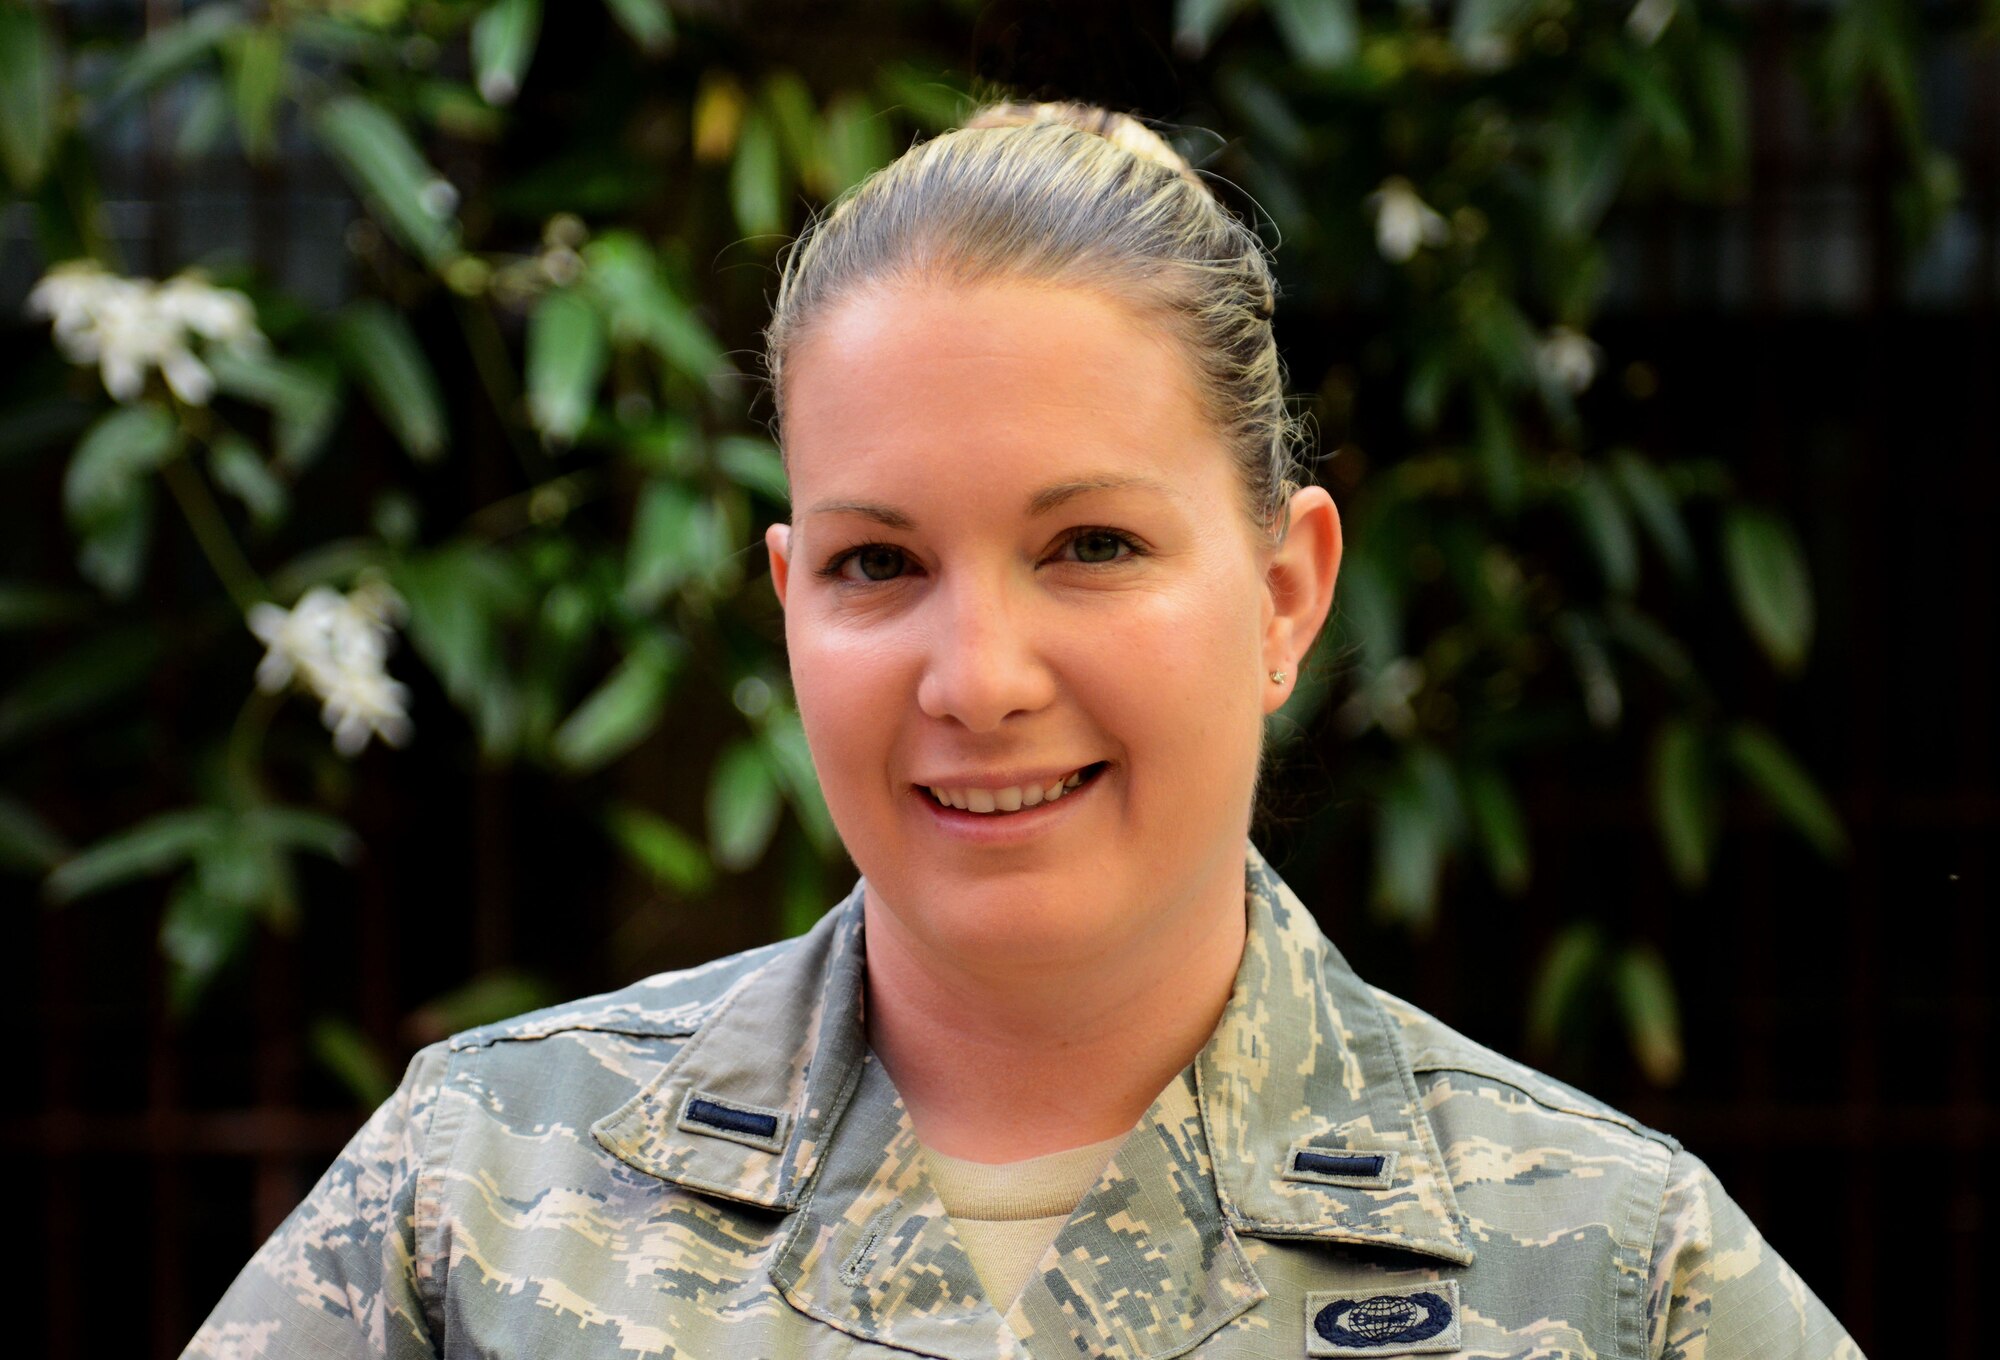 1st Lt. Christine, 9th Intelligence Squadron mission operations commander, poses for a photo at Beale Air Force Base, California.(U.S. Air Force photo/Staff Sgt. Jeffery Schultze)